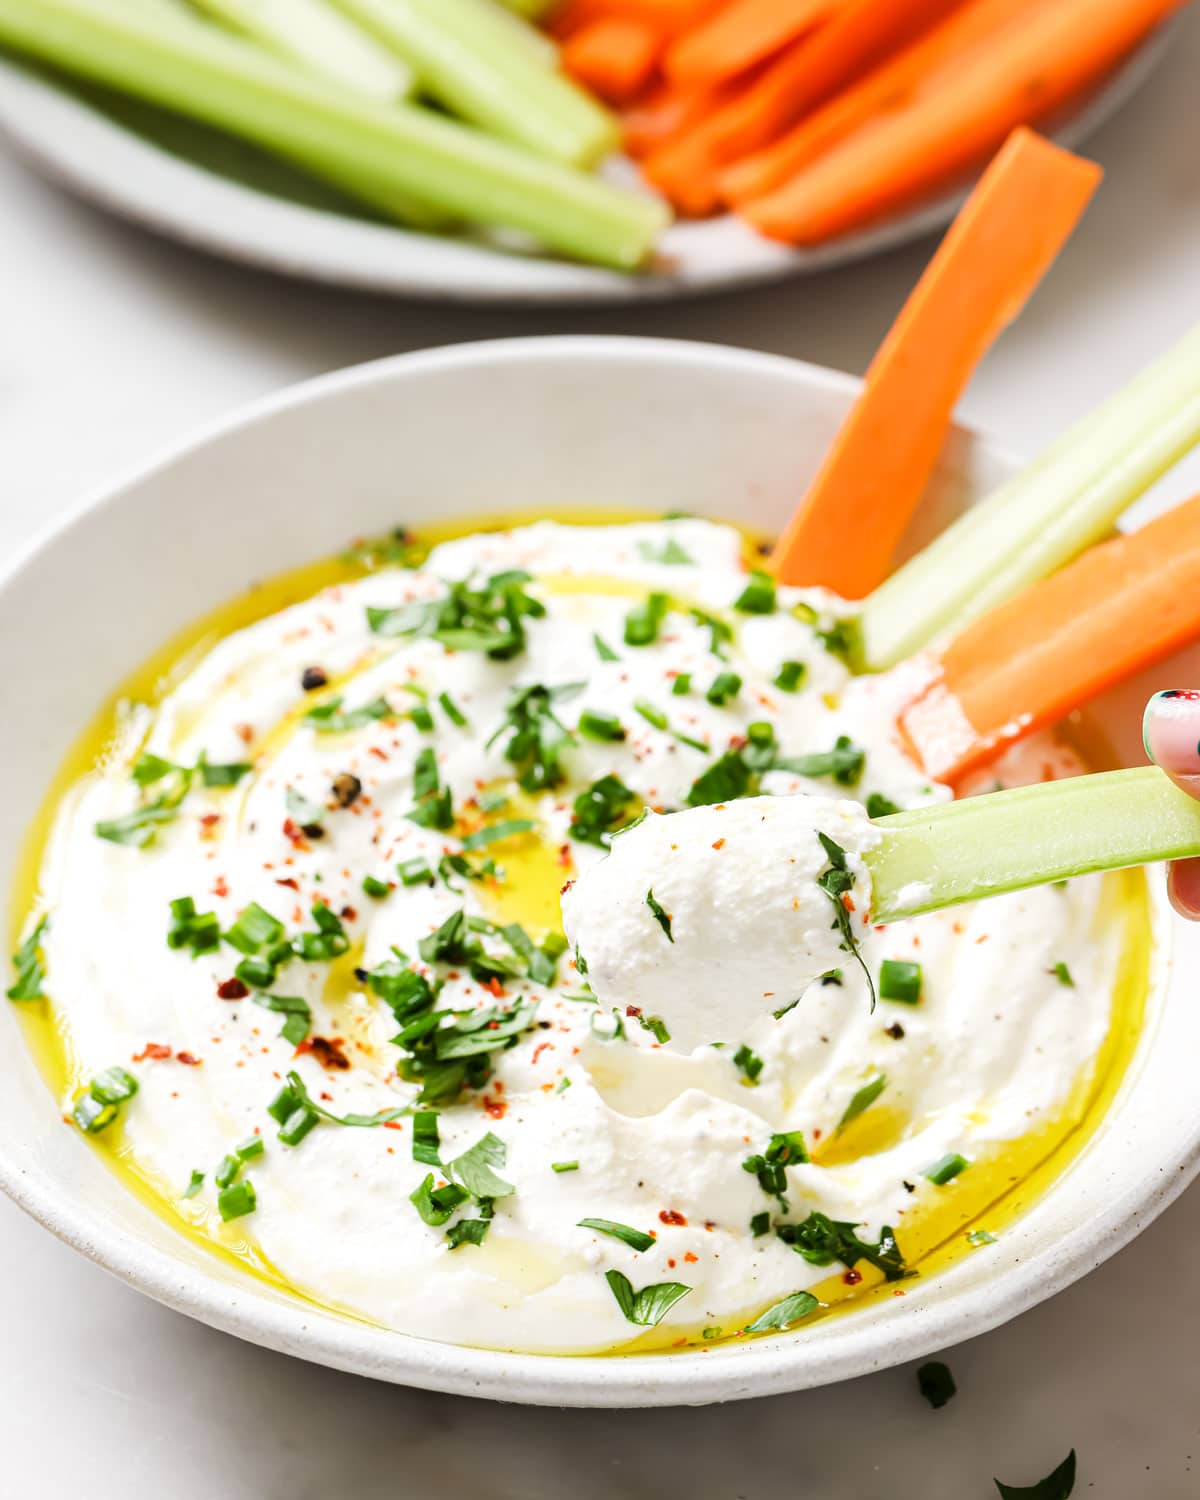 Blended cottage cheese topped with olive oil, pepper flakes and chopped herbs and vegetable sticks for dipping.